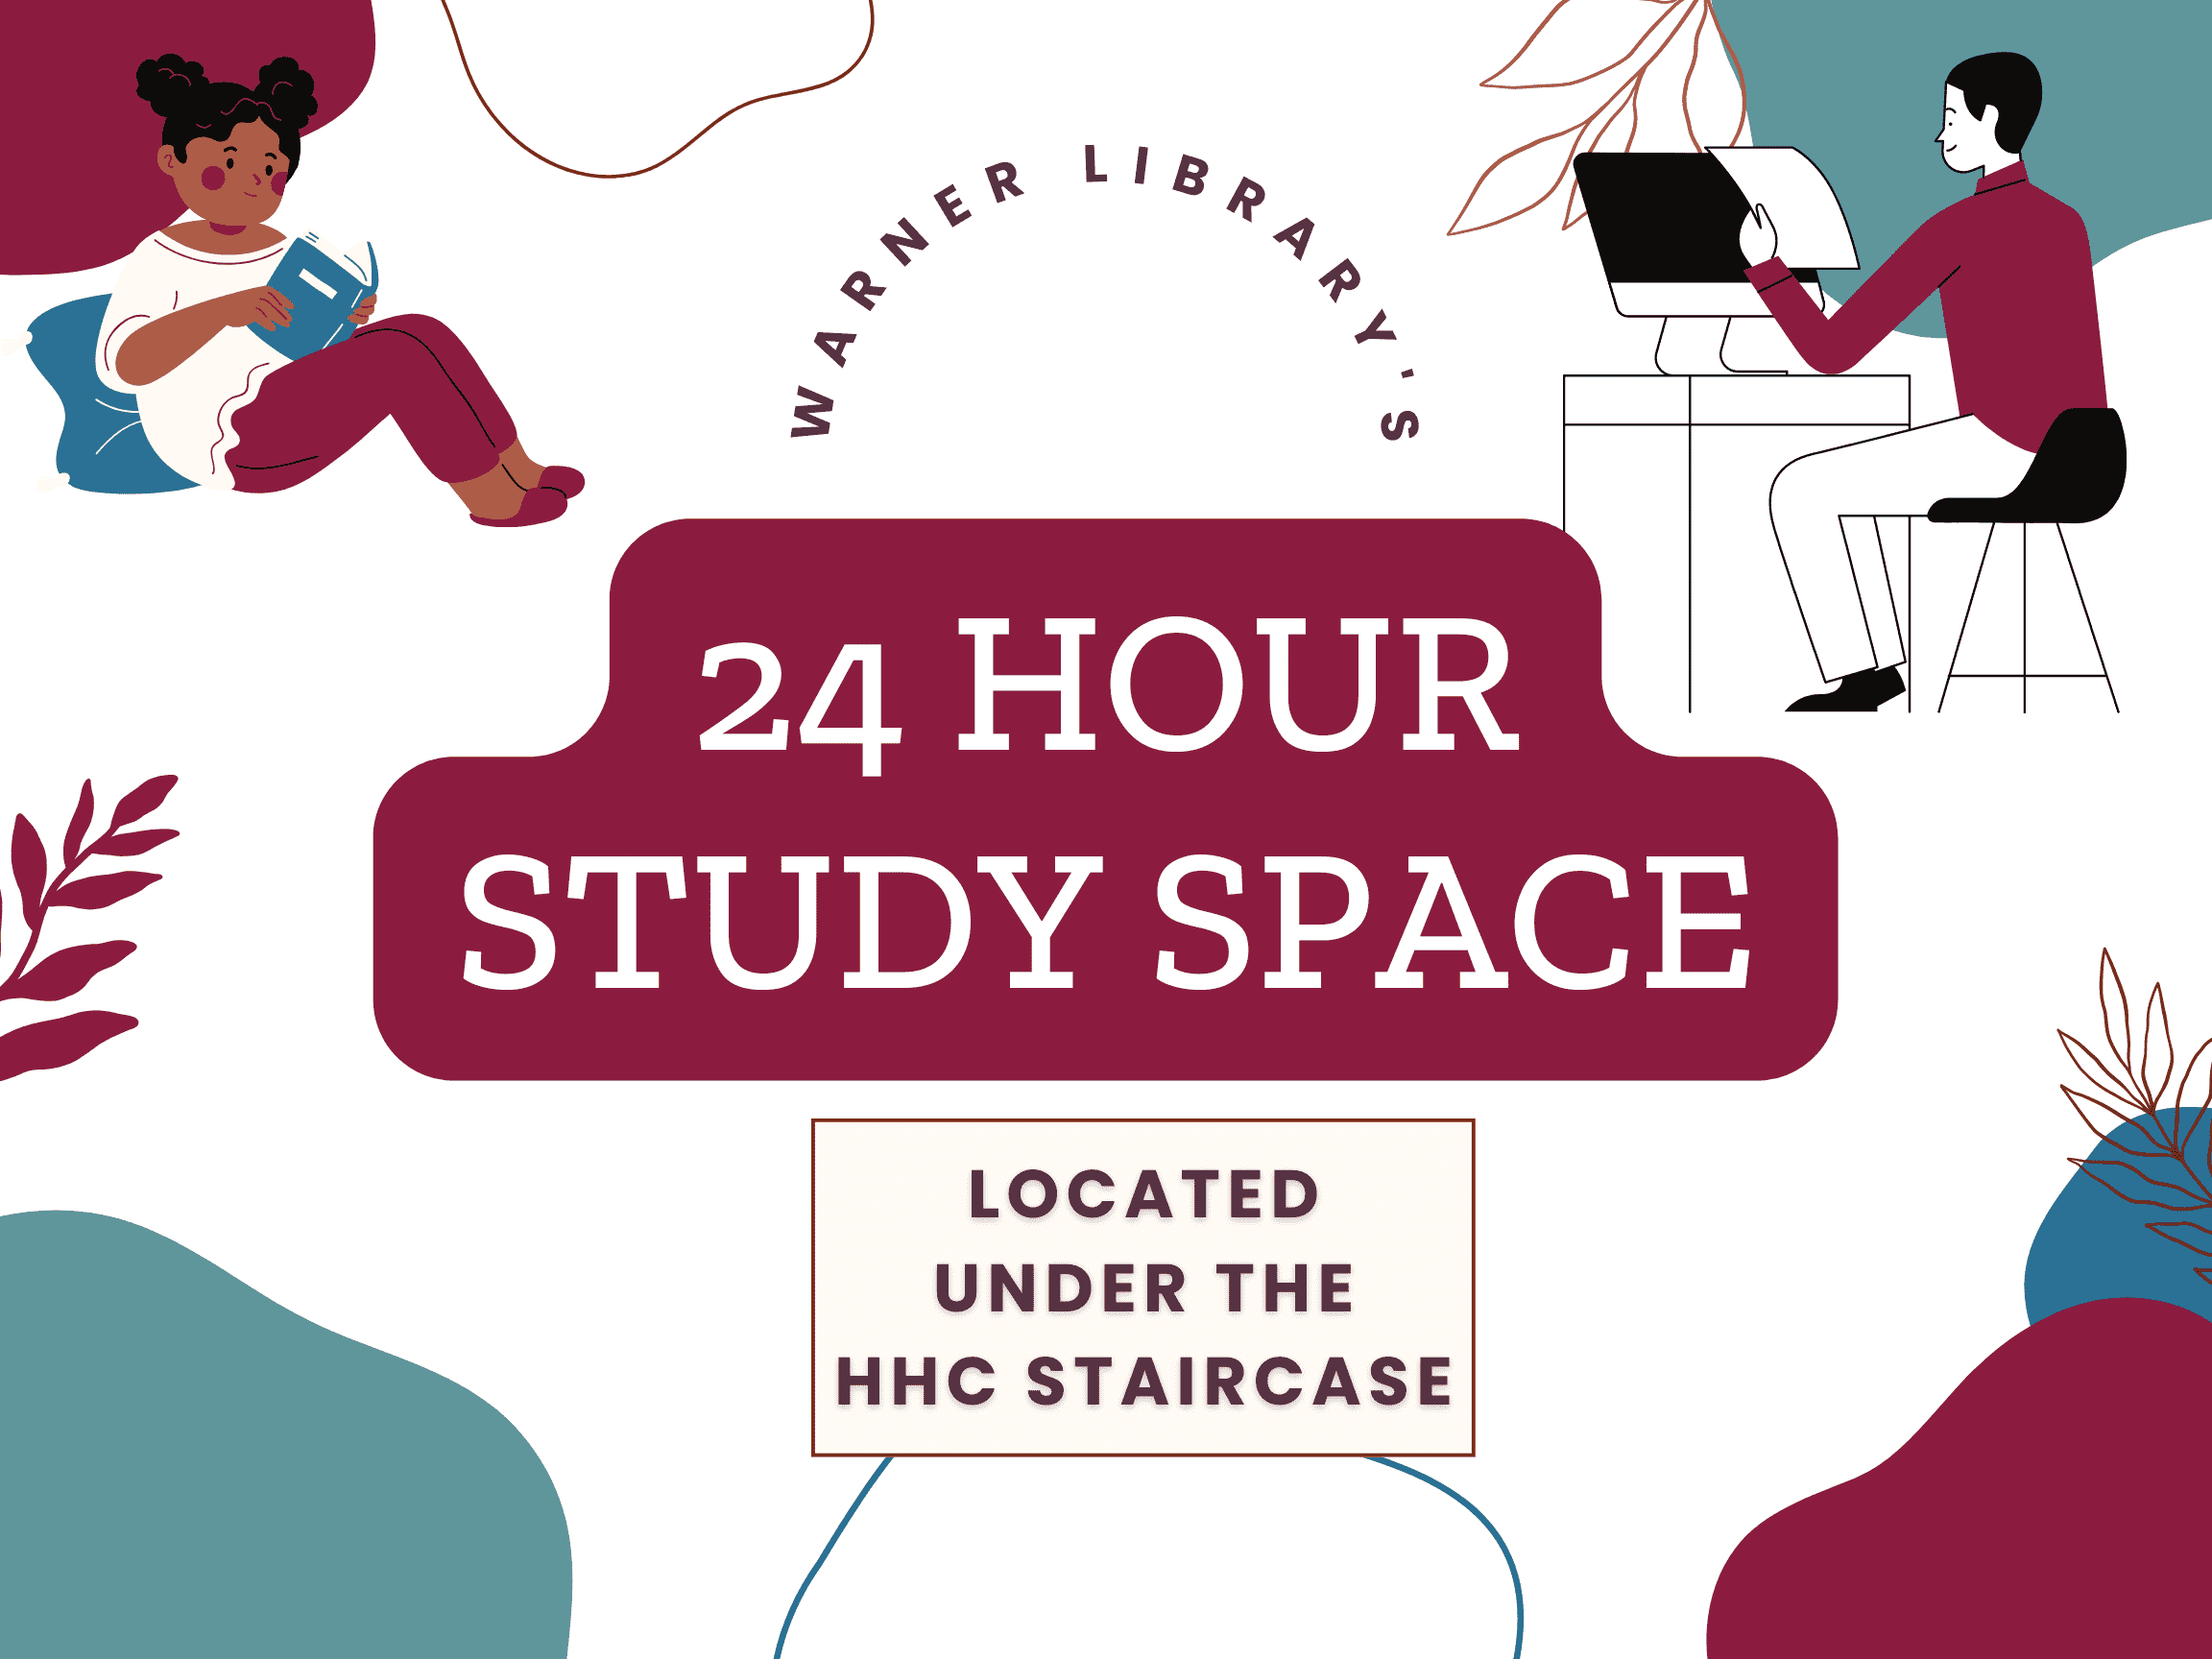 24 Study Space located under the HHC Staircase